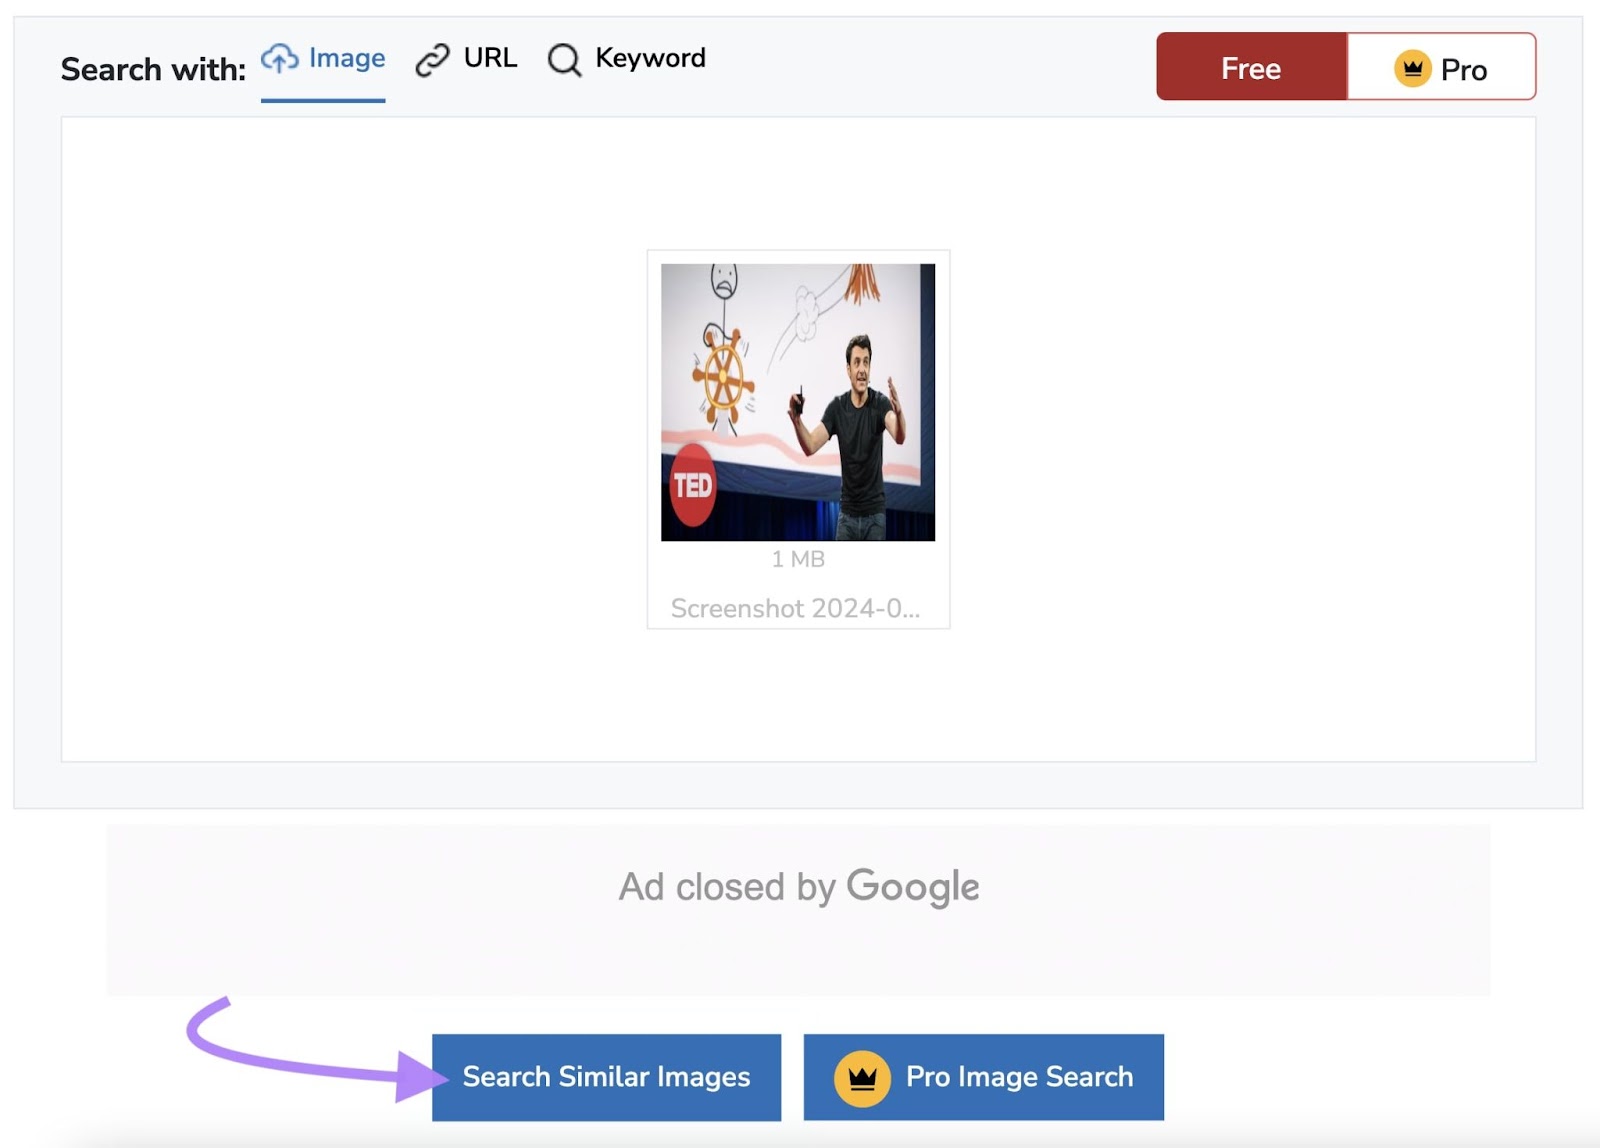 Small SEO Tools reverse image search with Ted Talk thumbnail and Search Similar Images highlighted